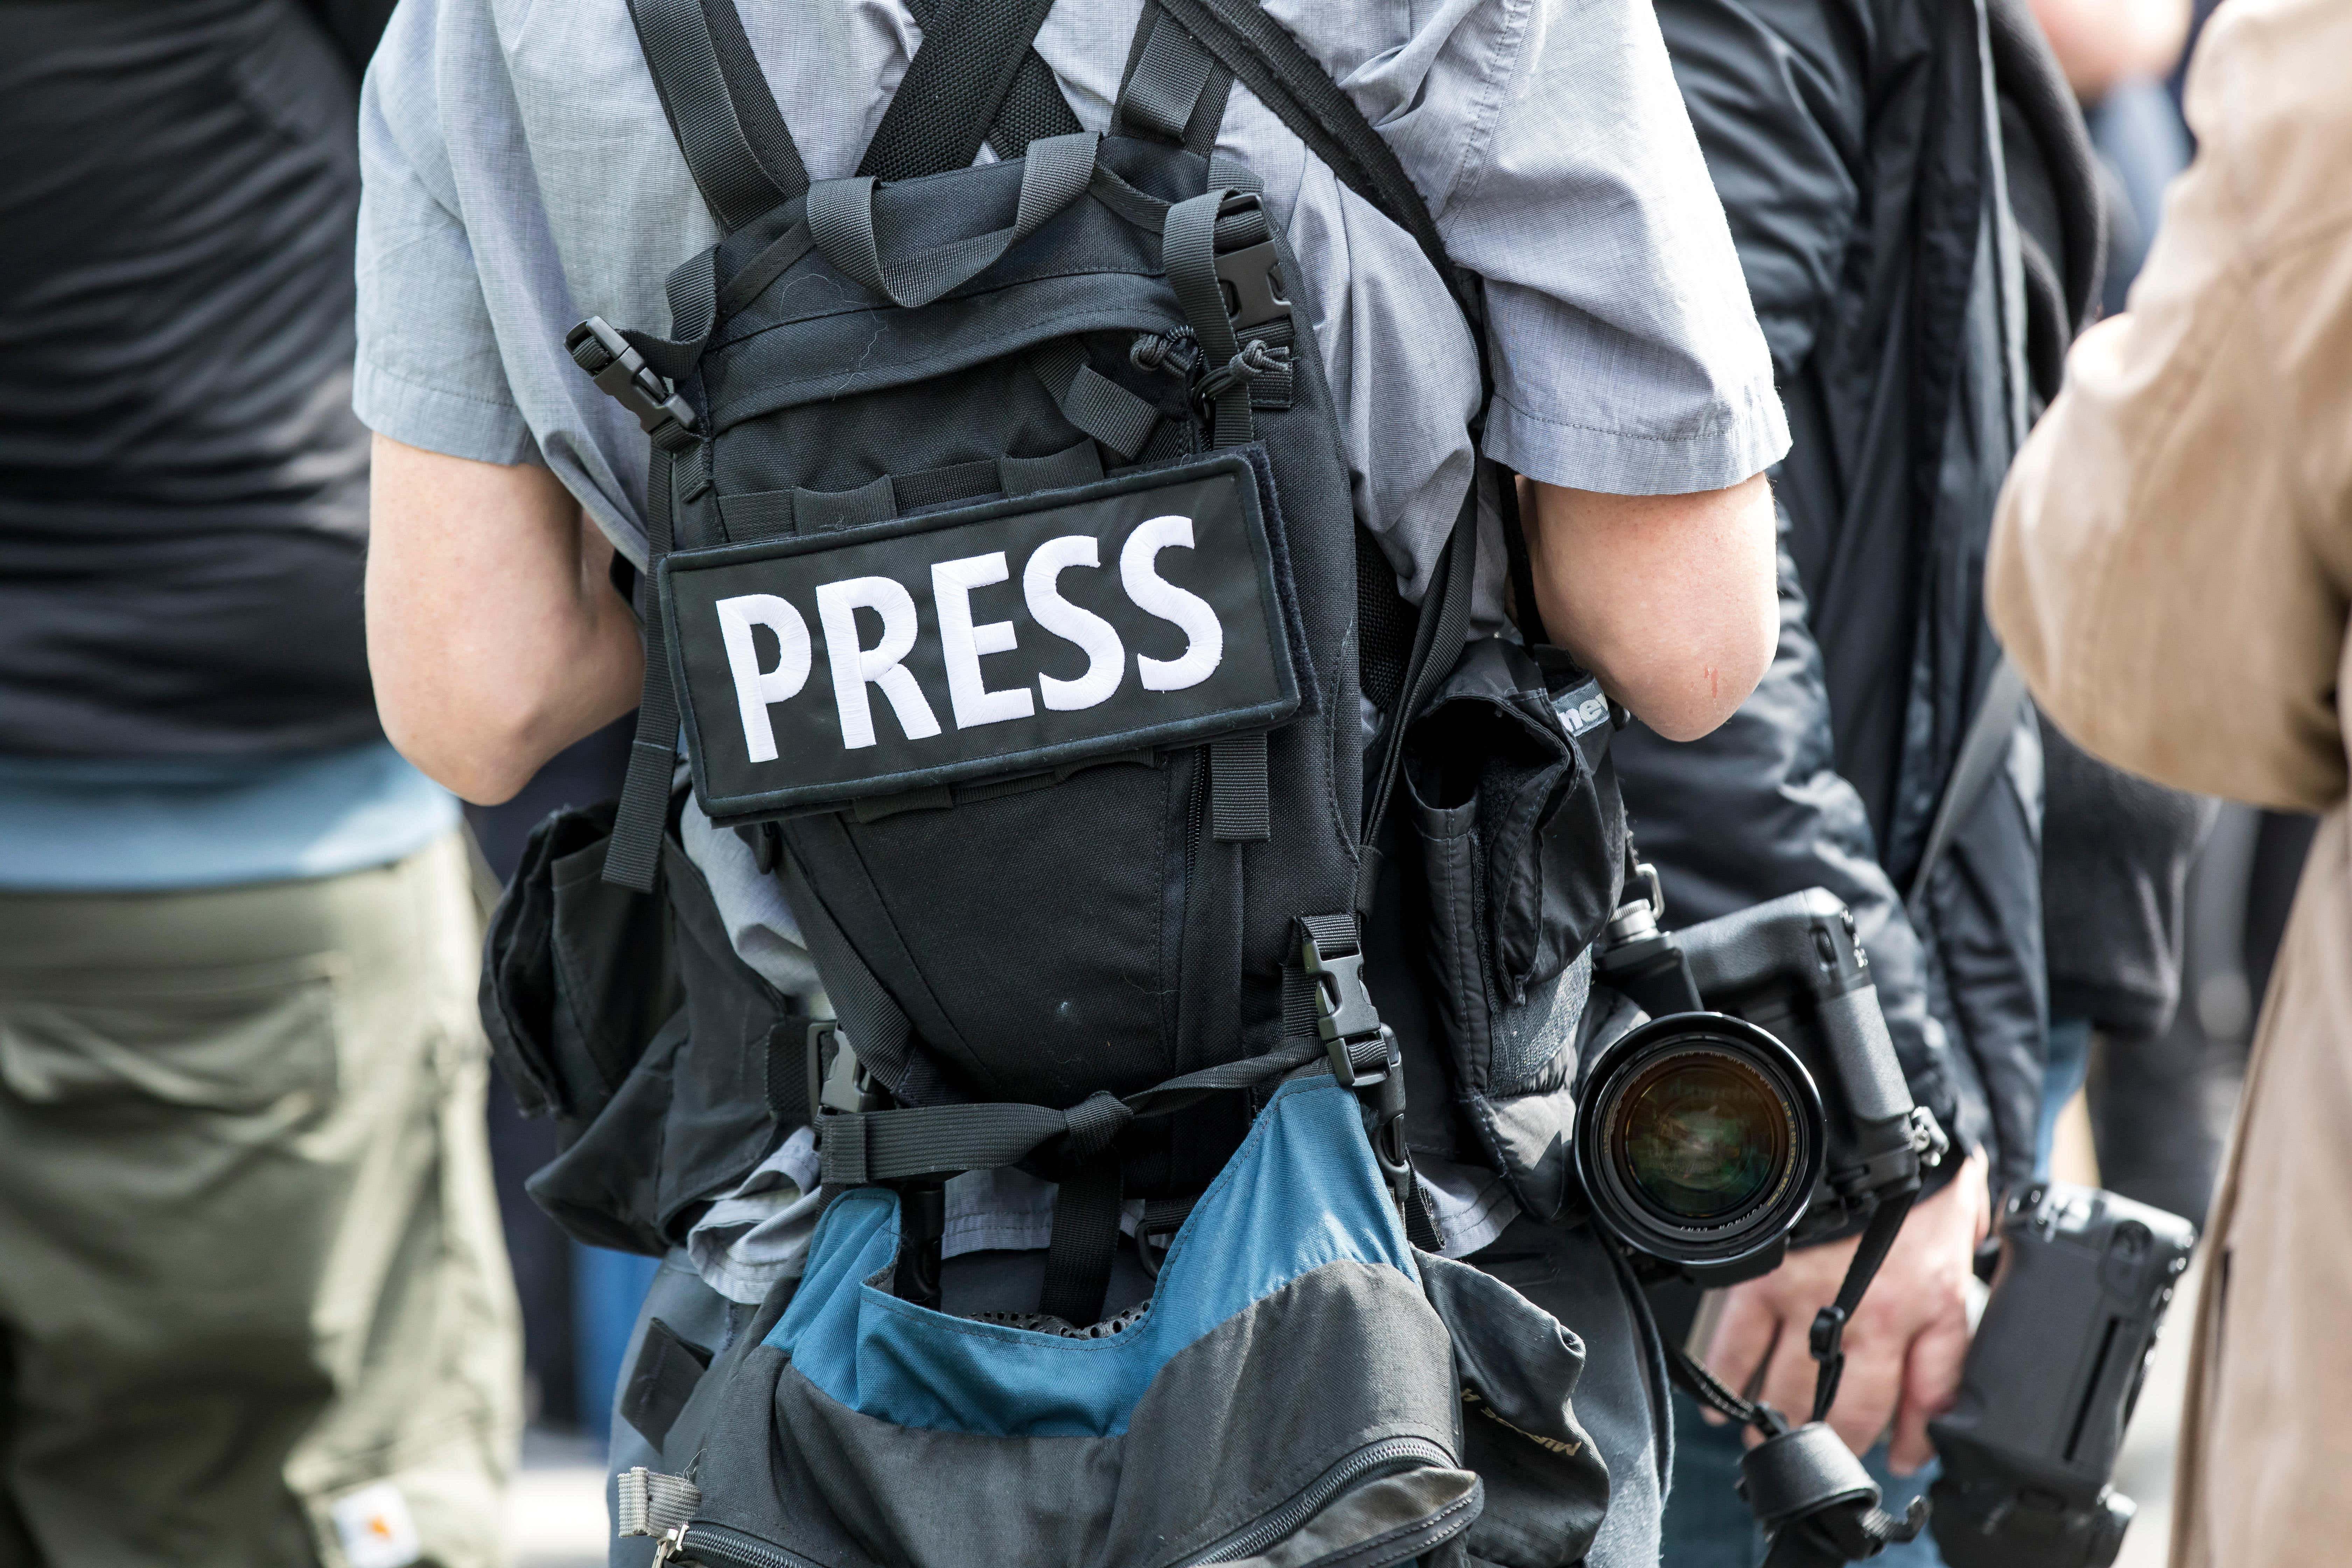 New proposed rules would mean police forces did not have to name suspects for the media (Alamy/PA)